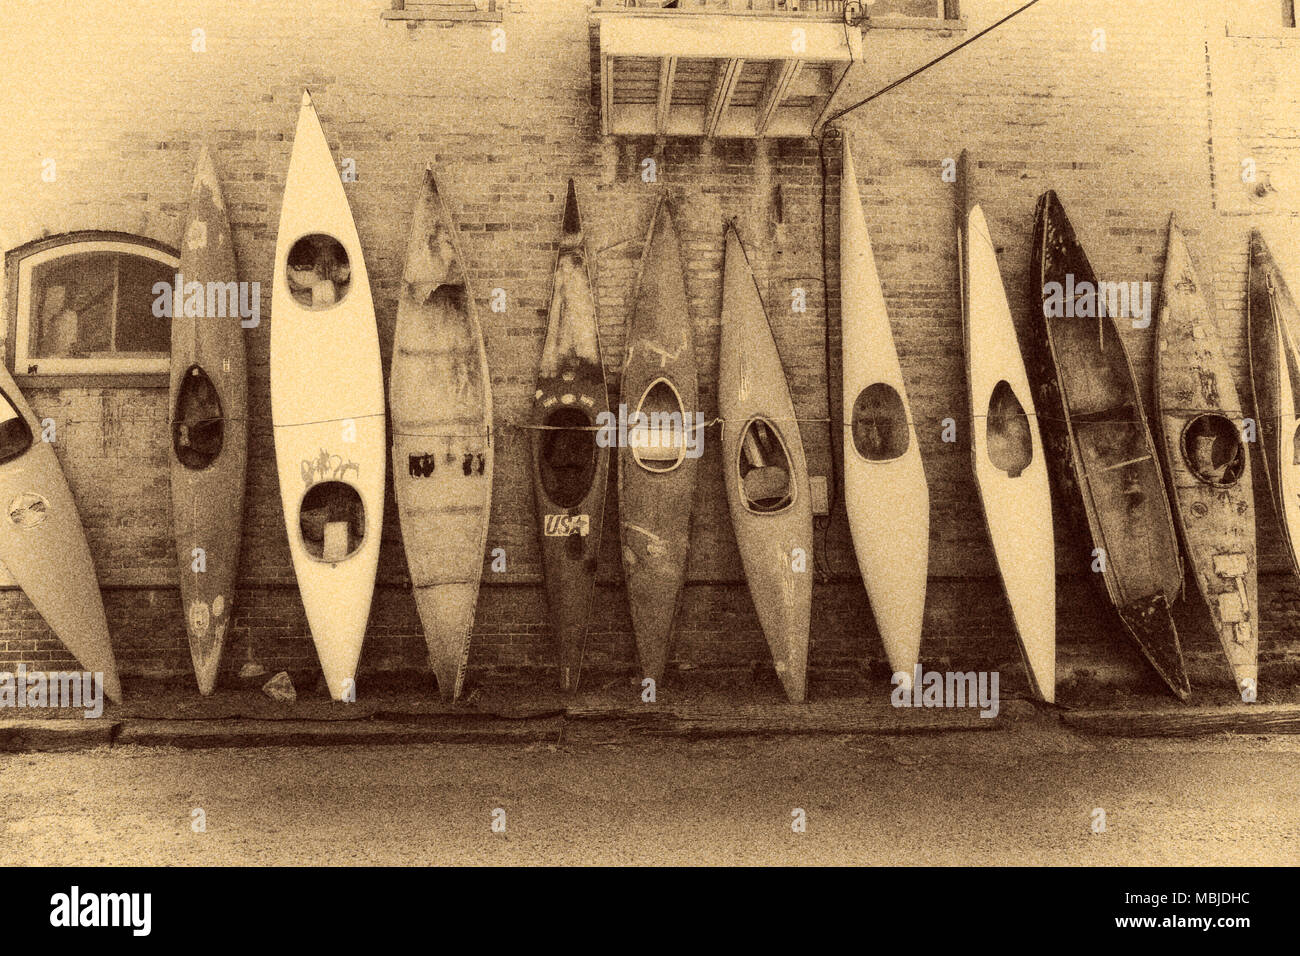 Calotype black & white view of kayaks along a historic building in downtown Salida, Colorado, USA. Stock Photo